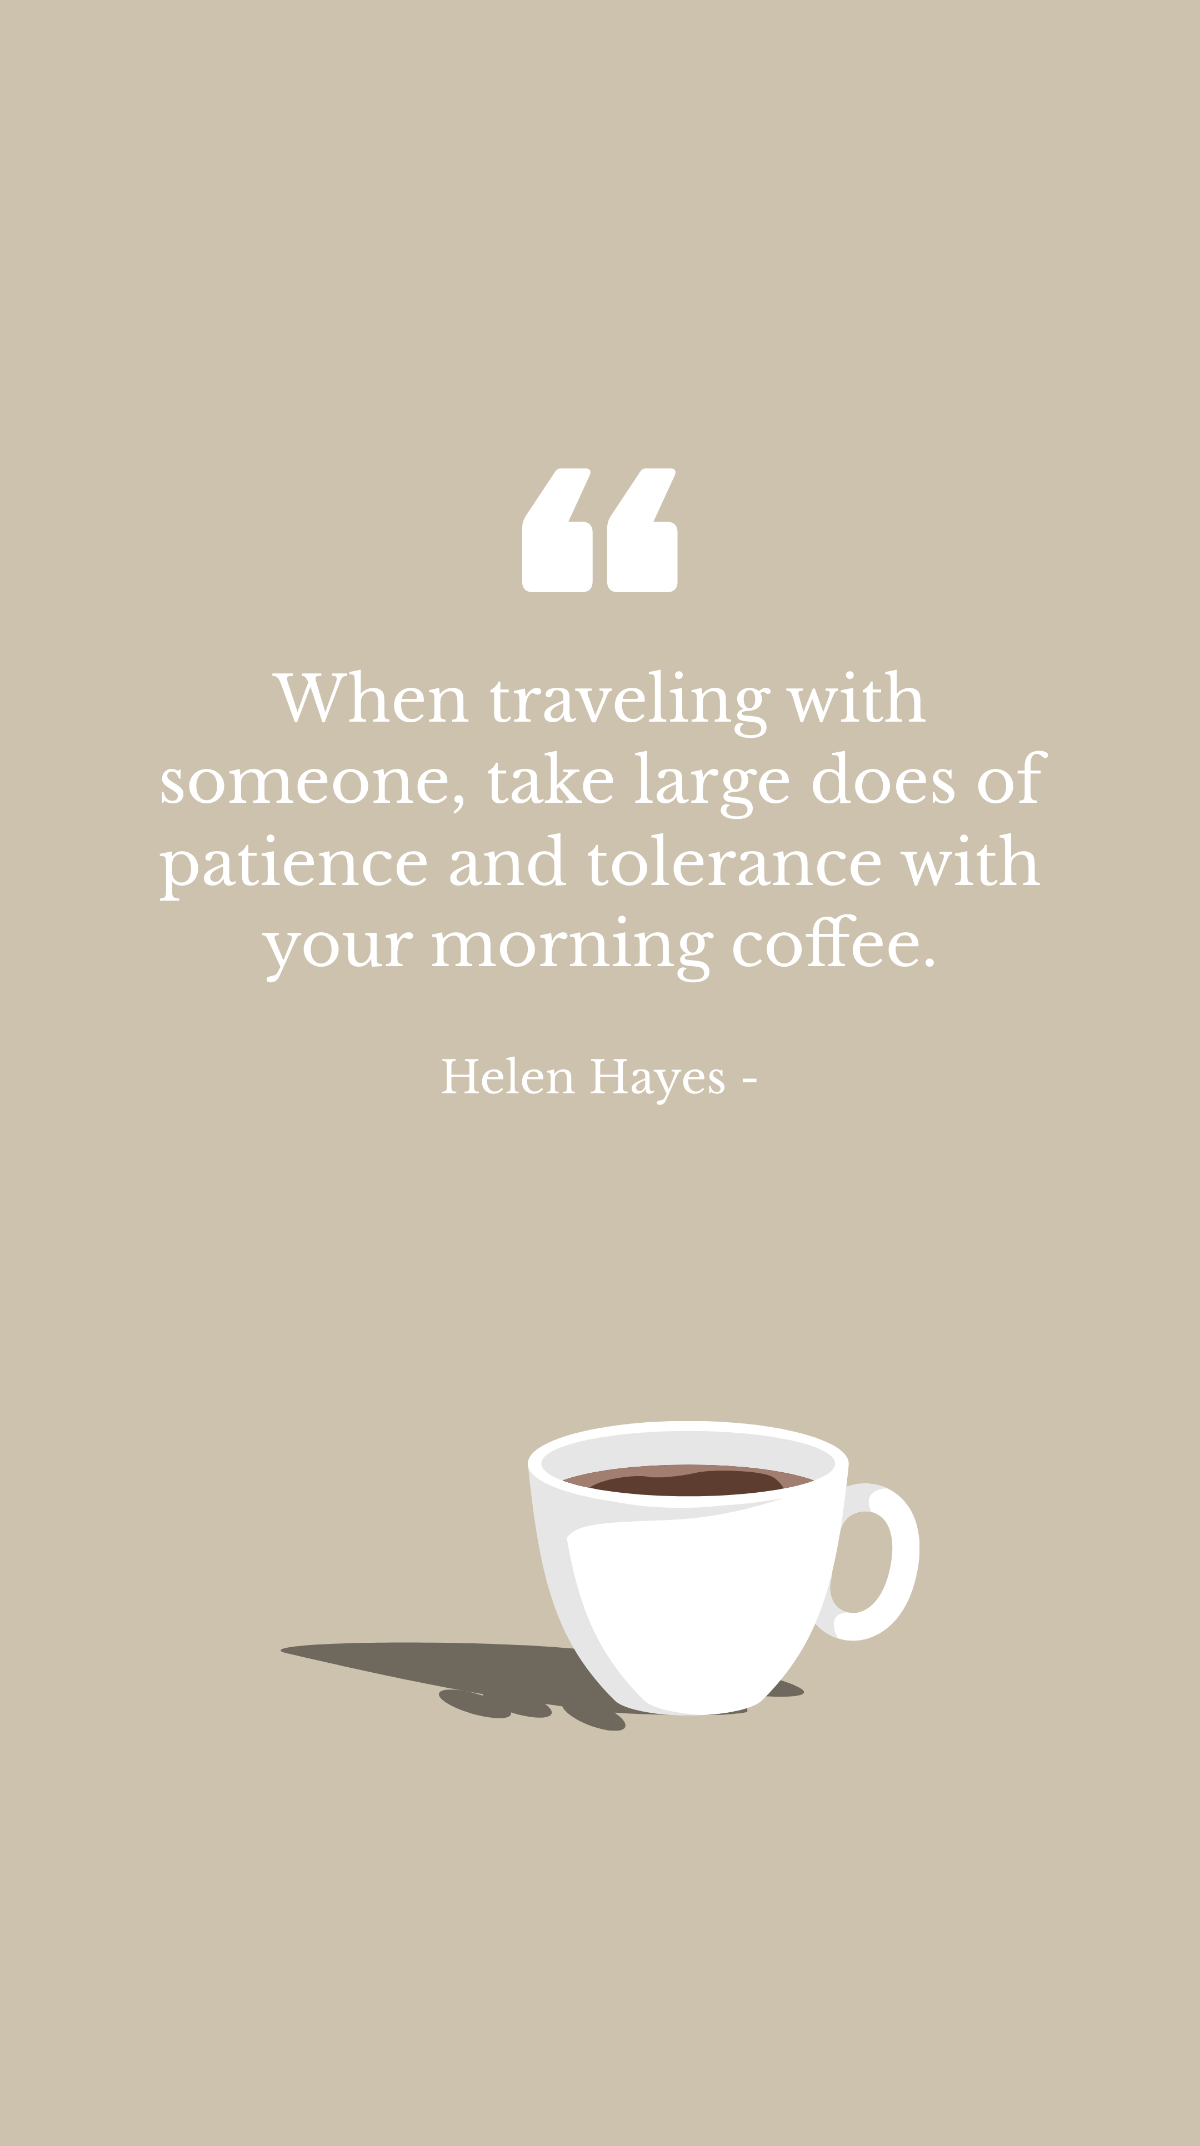 Free Helen Hayes - When traveling with someone, take large does of patience and tolerance with your morning coffee. Template